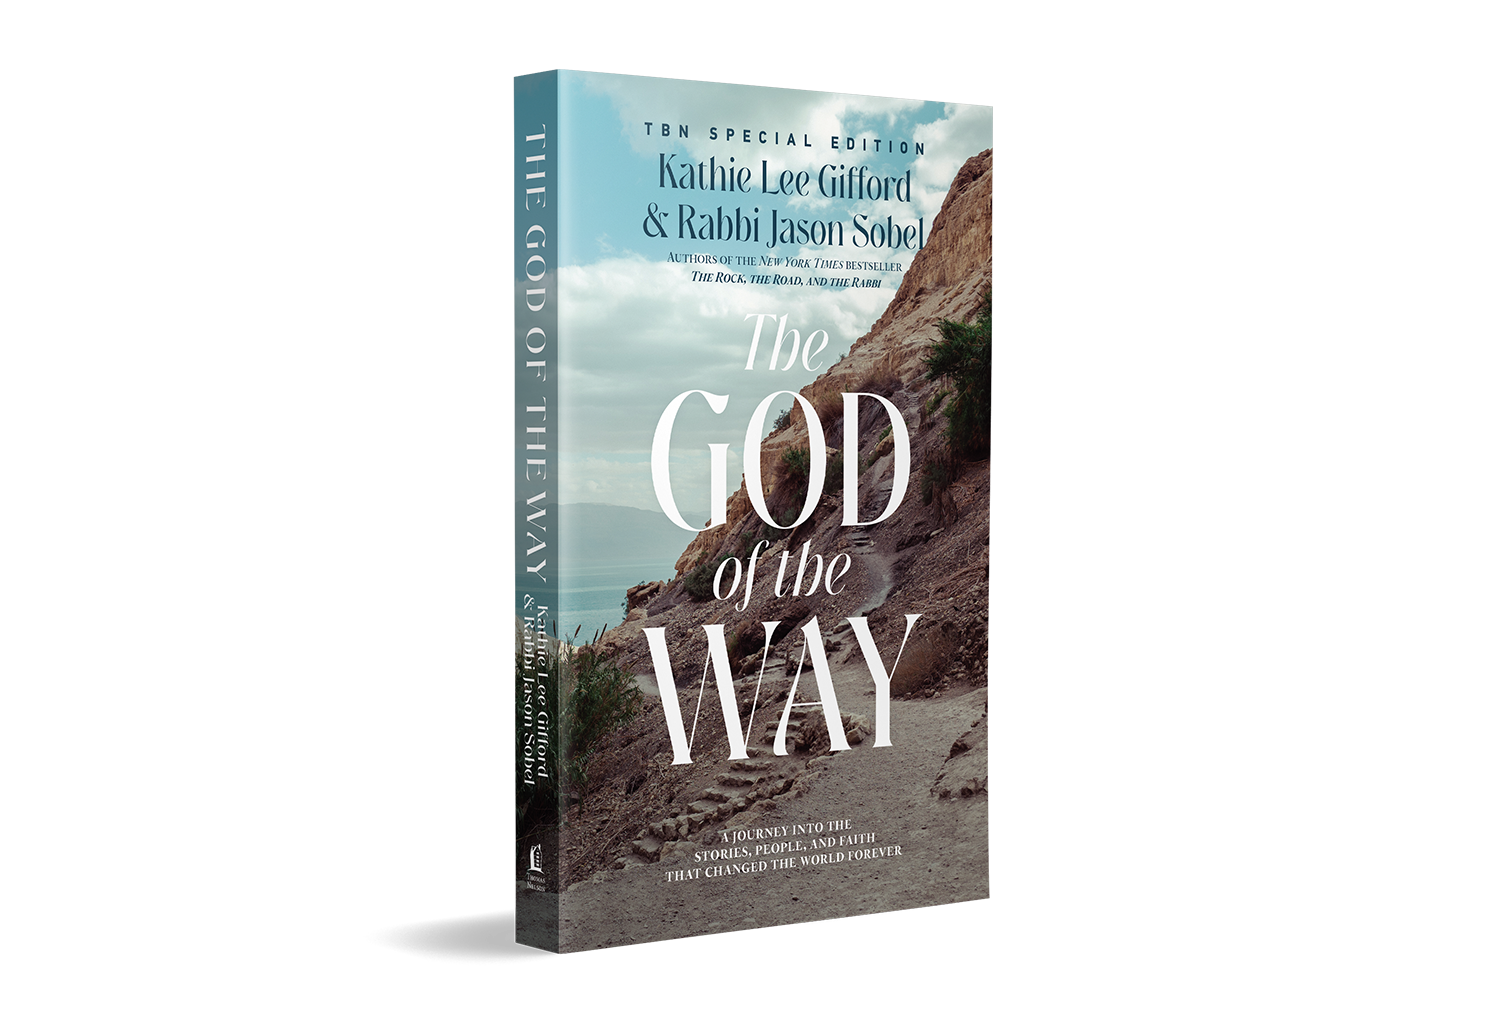 The God of the Way by Kathie Lee Gifford and Rabbi Jason Sobel on TBN